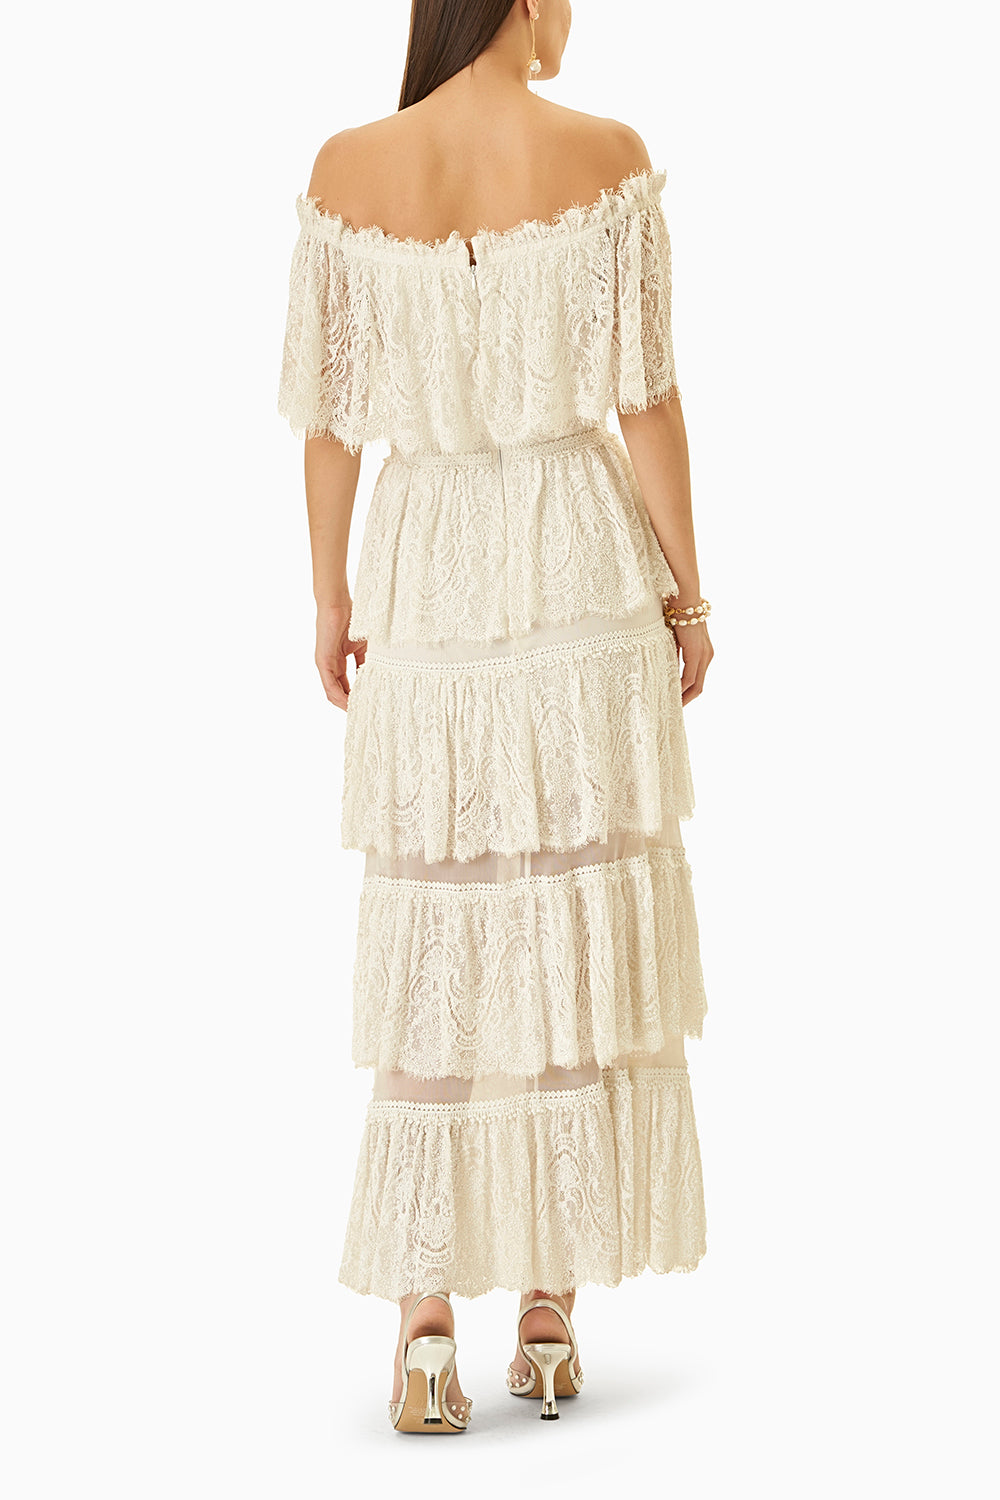 White Lace Full Embroidered Layered Dress